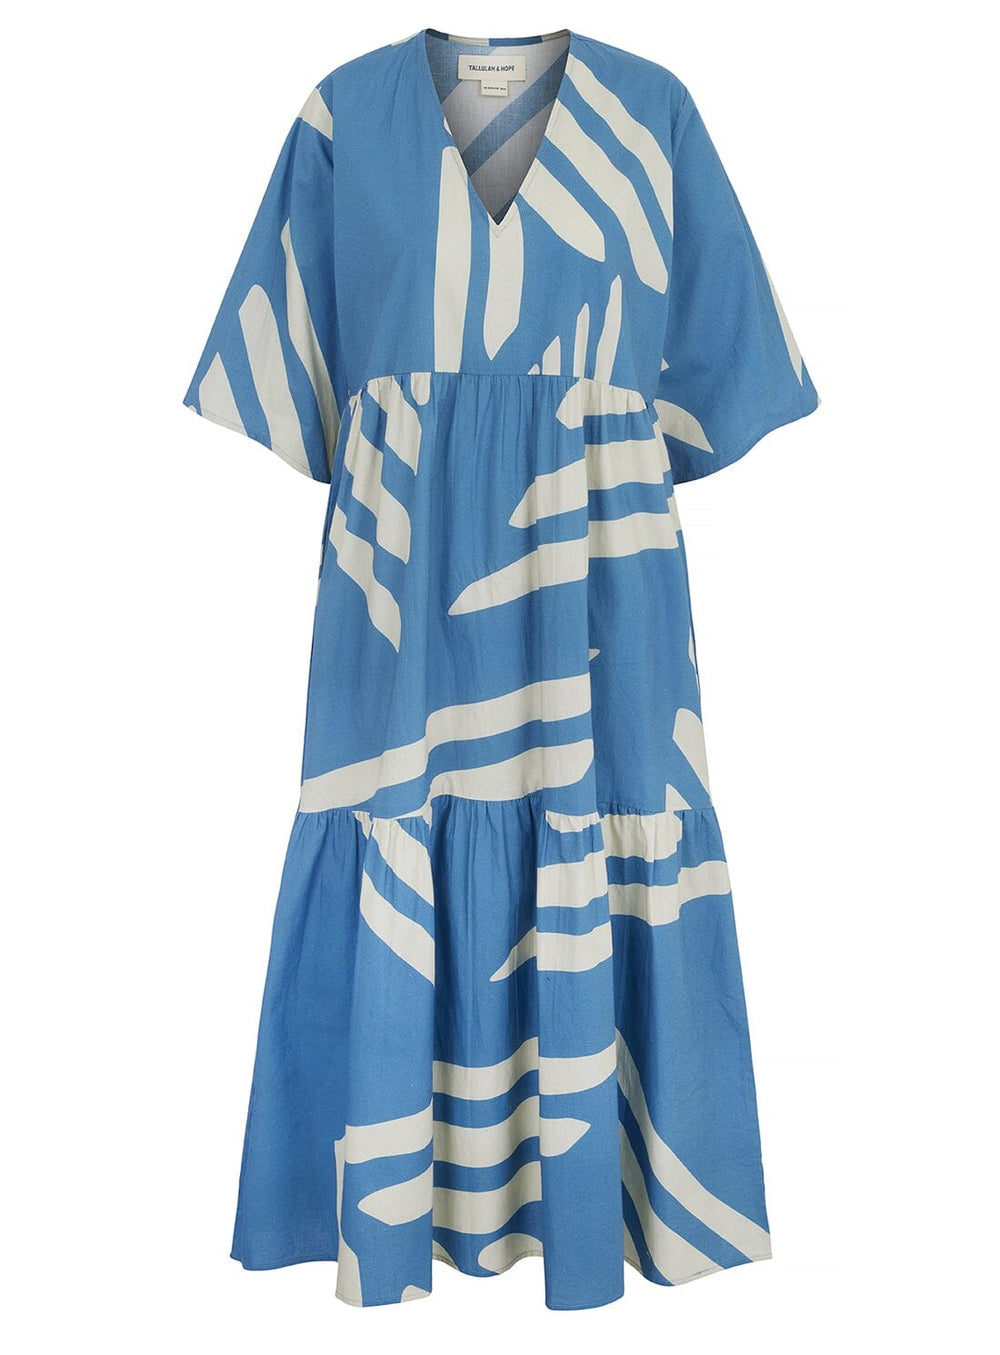 Egypt Dress in Bell Blue and Cream Dresses YBDFinds 